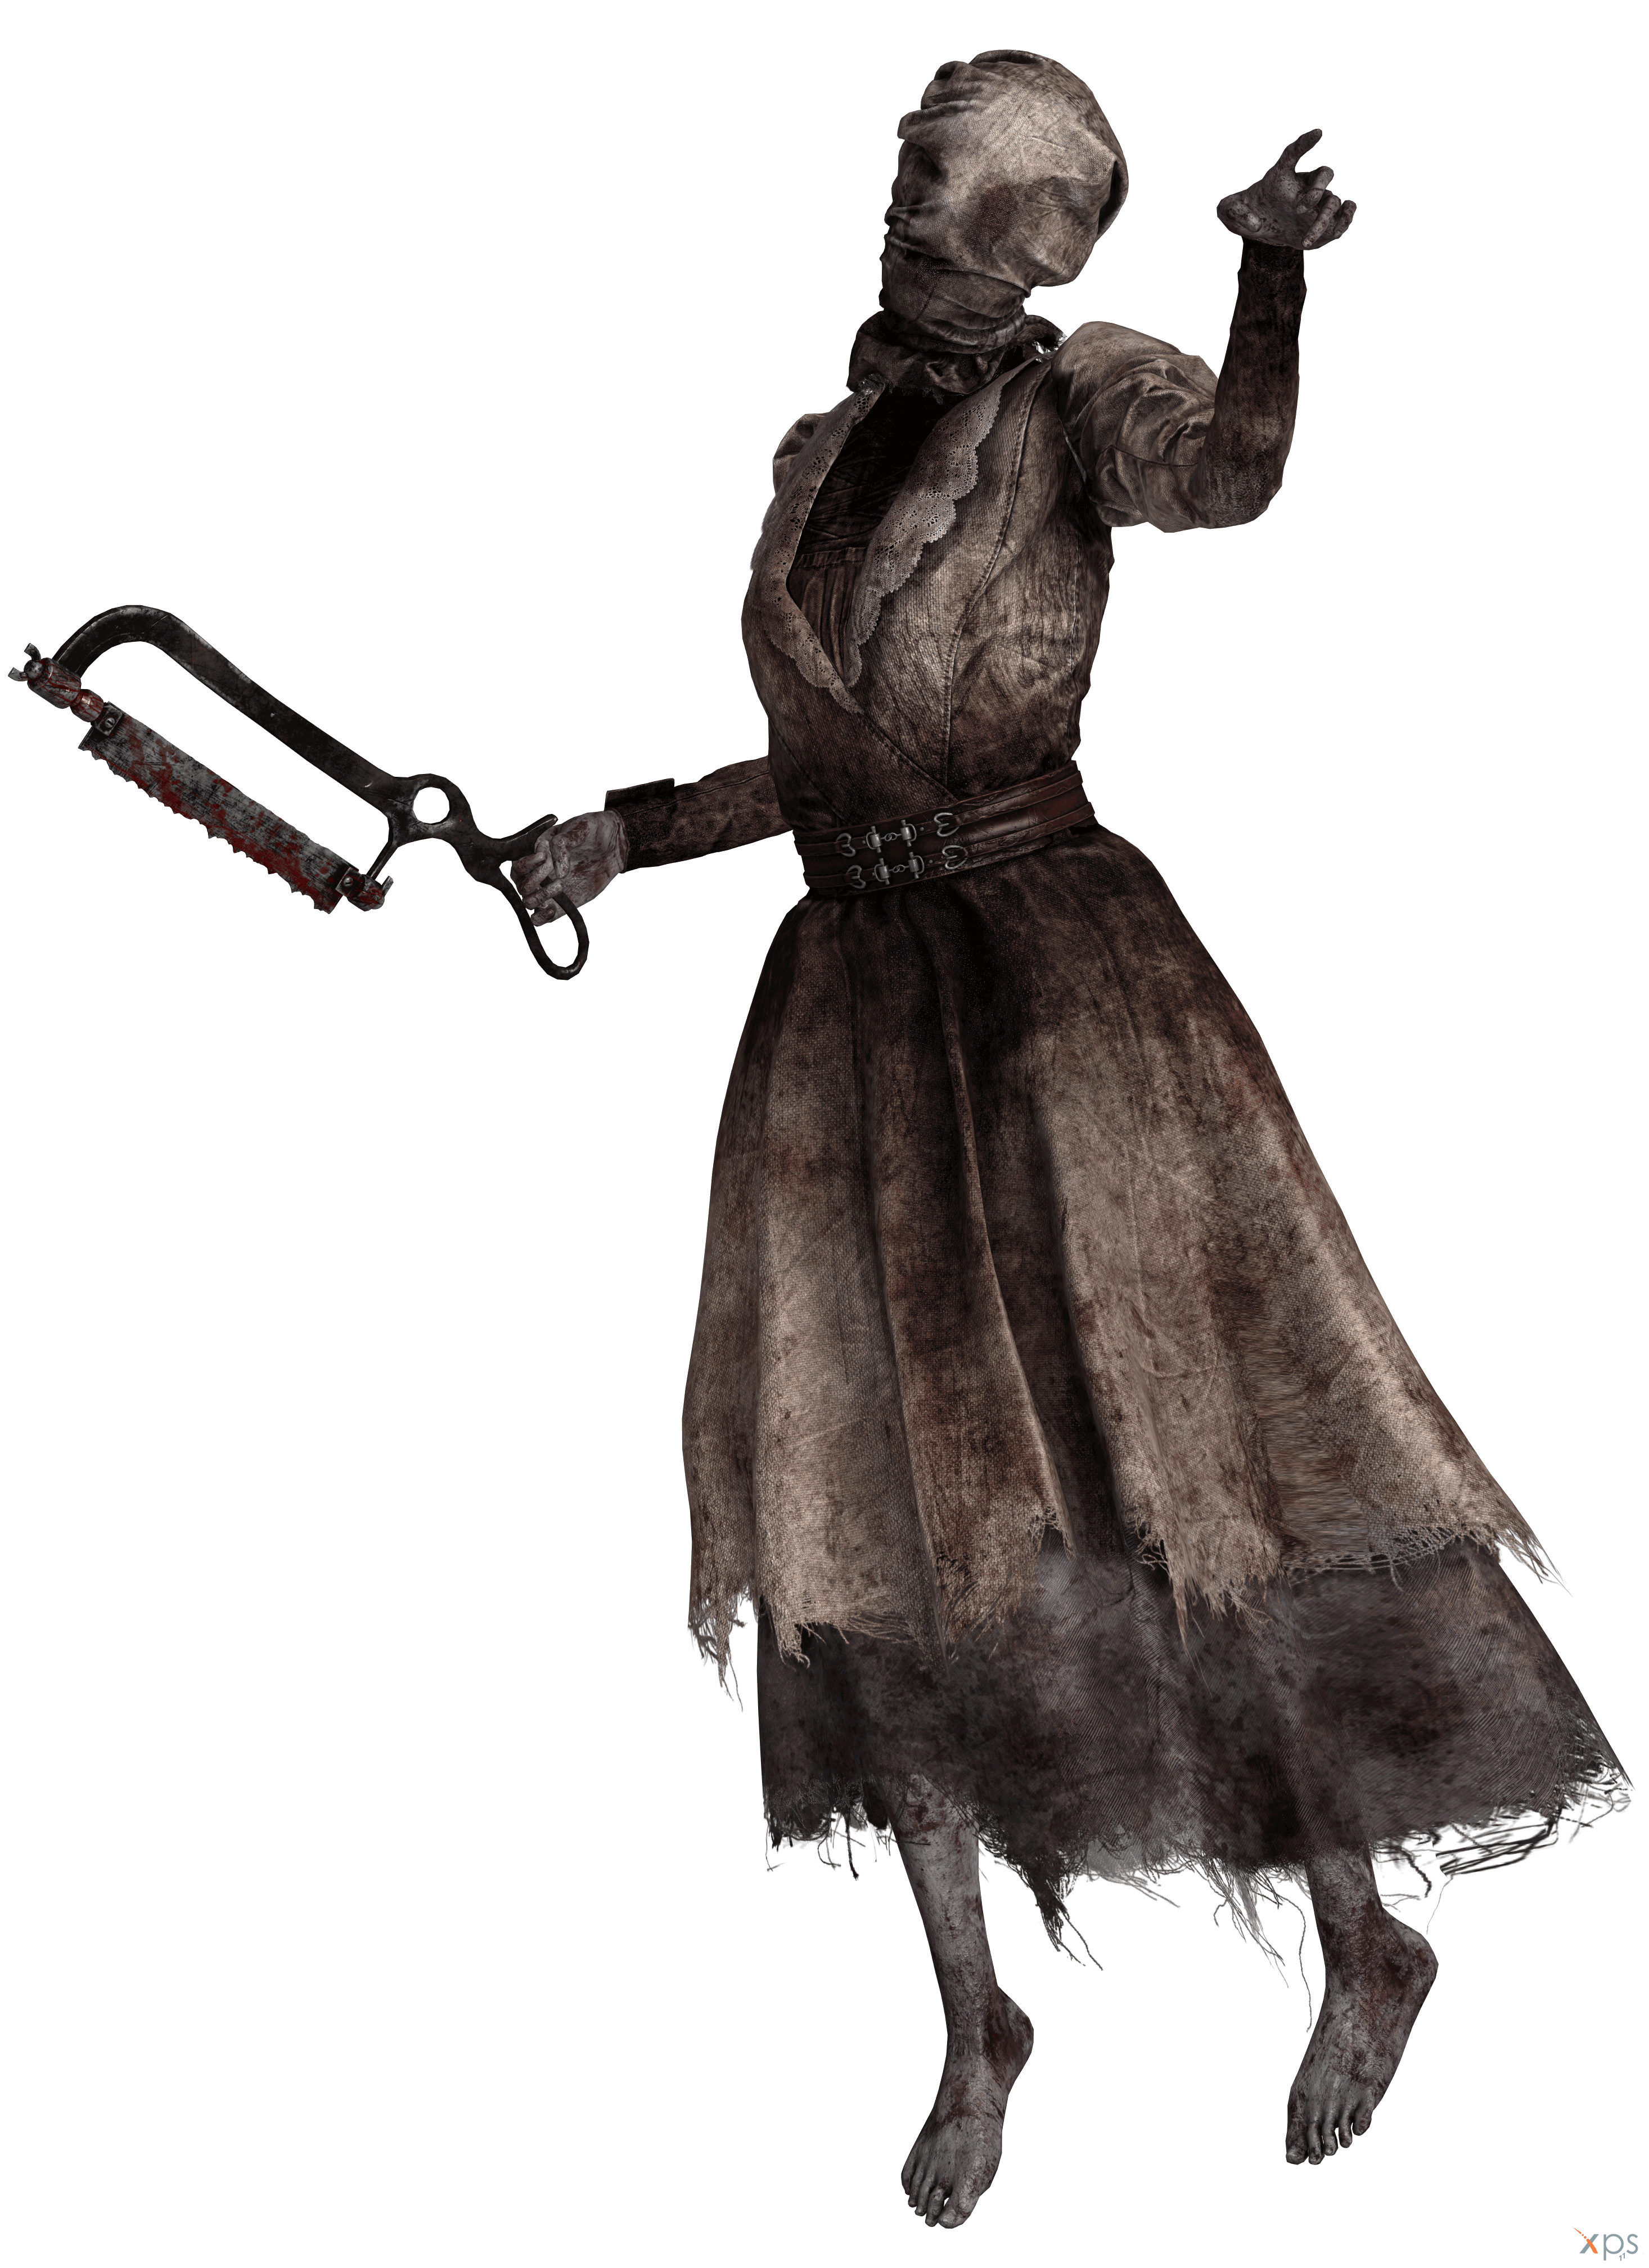 Sally Smithson - Official Dead by Daylight Wiki